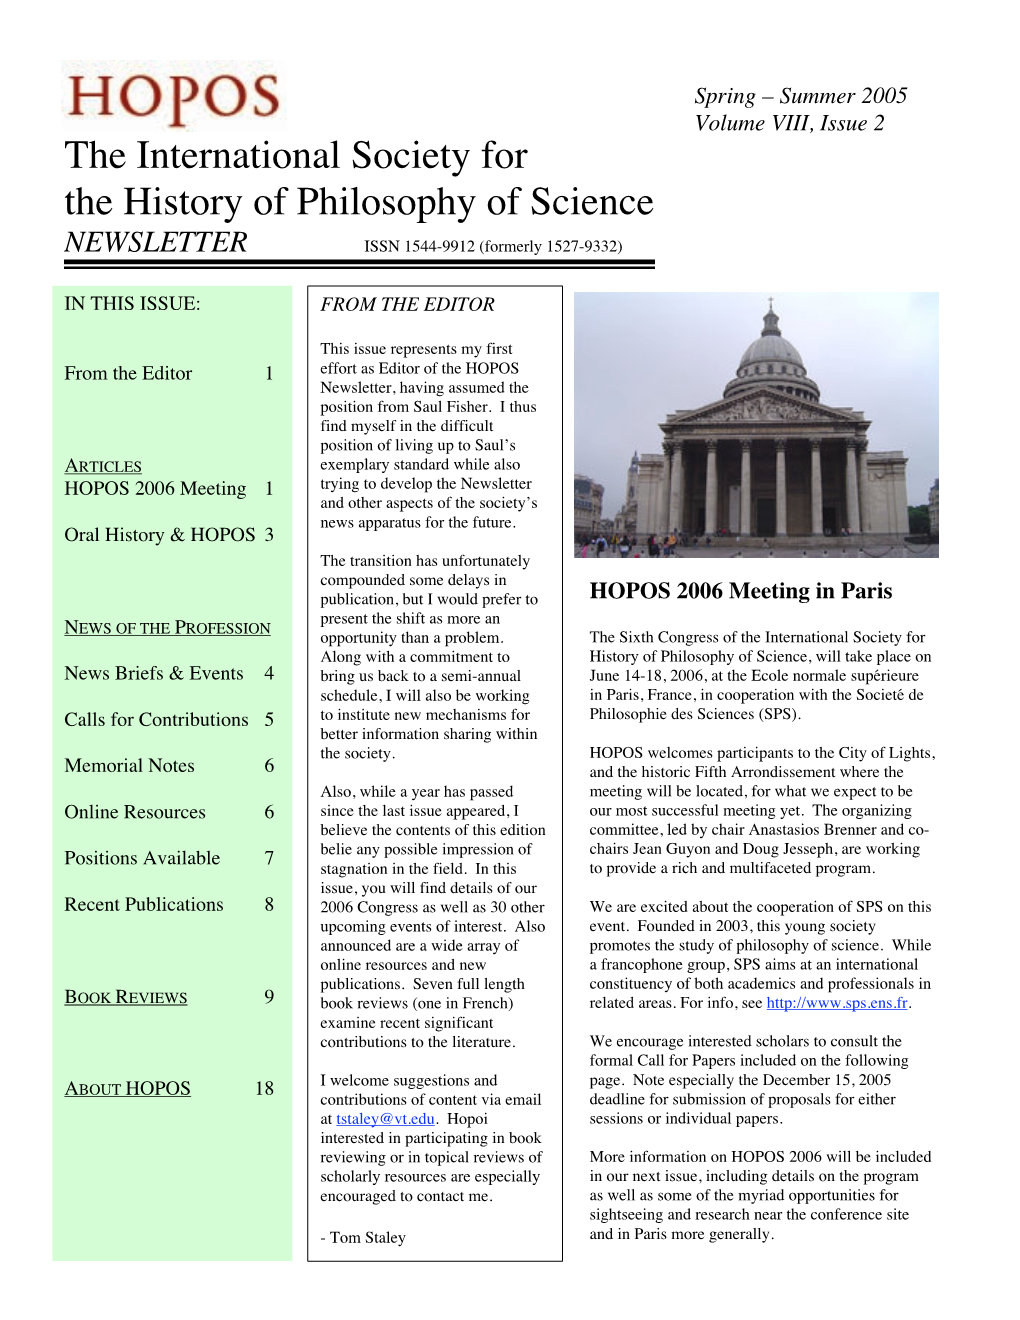 The International Society for the History of Philosophy of Science NEWSLETTER ISSN 1544-9912 (Formerly 1527-9332)